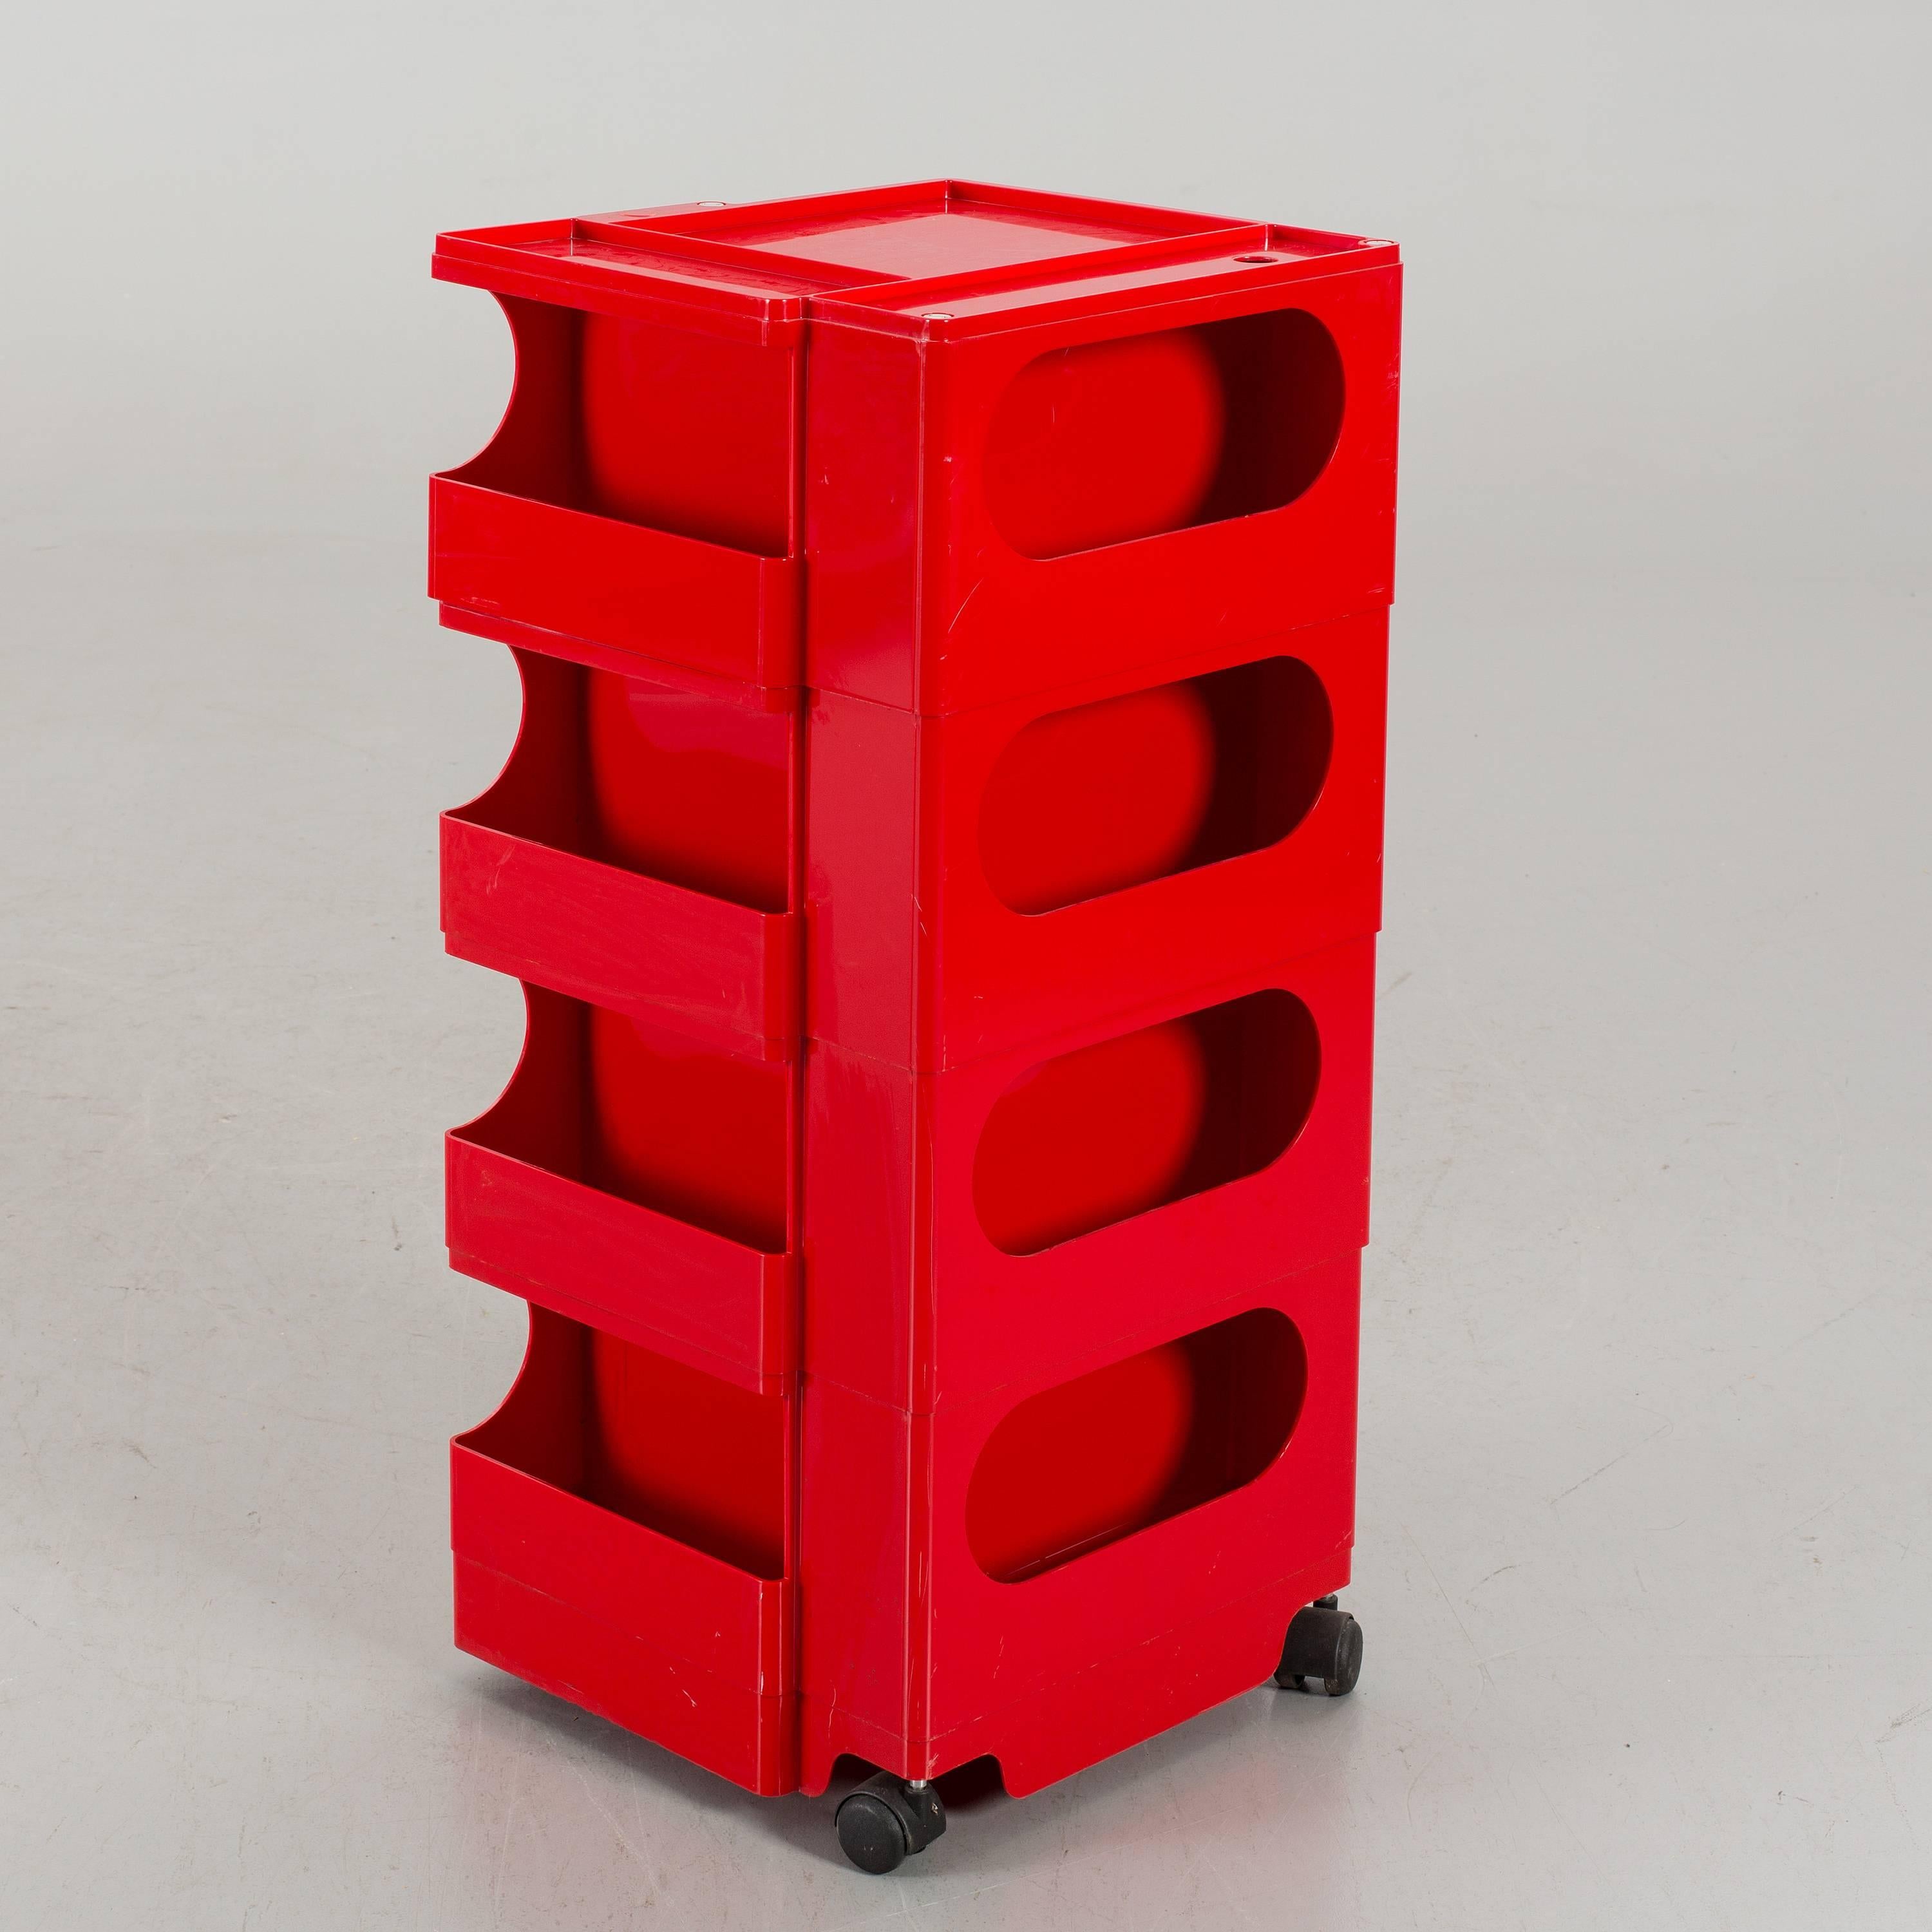 A plastic chest of drawers, storage cart "Boby" by Joe Colombo for Bieffeplast, Padova, Italy, 1970s.